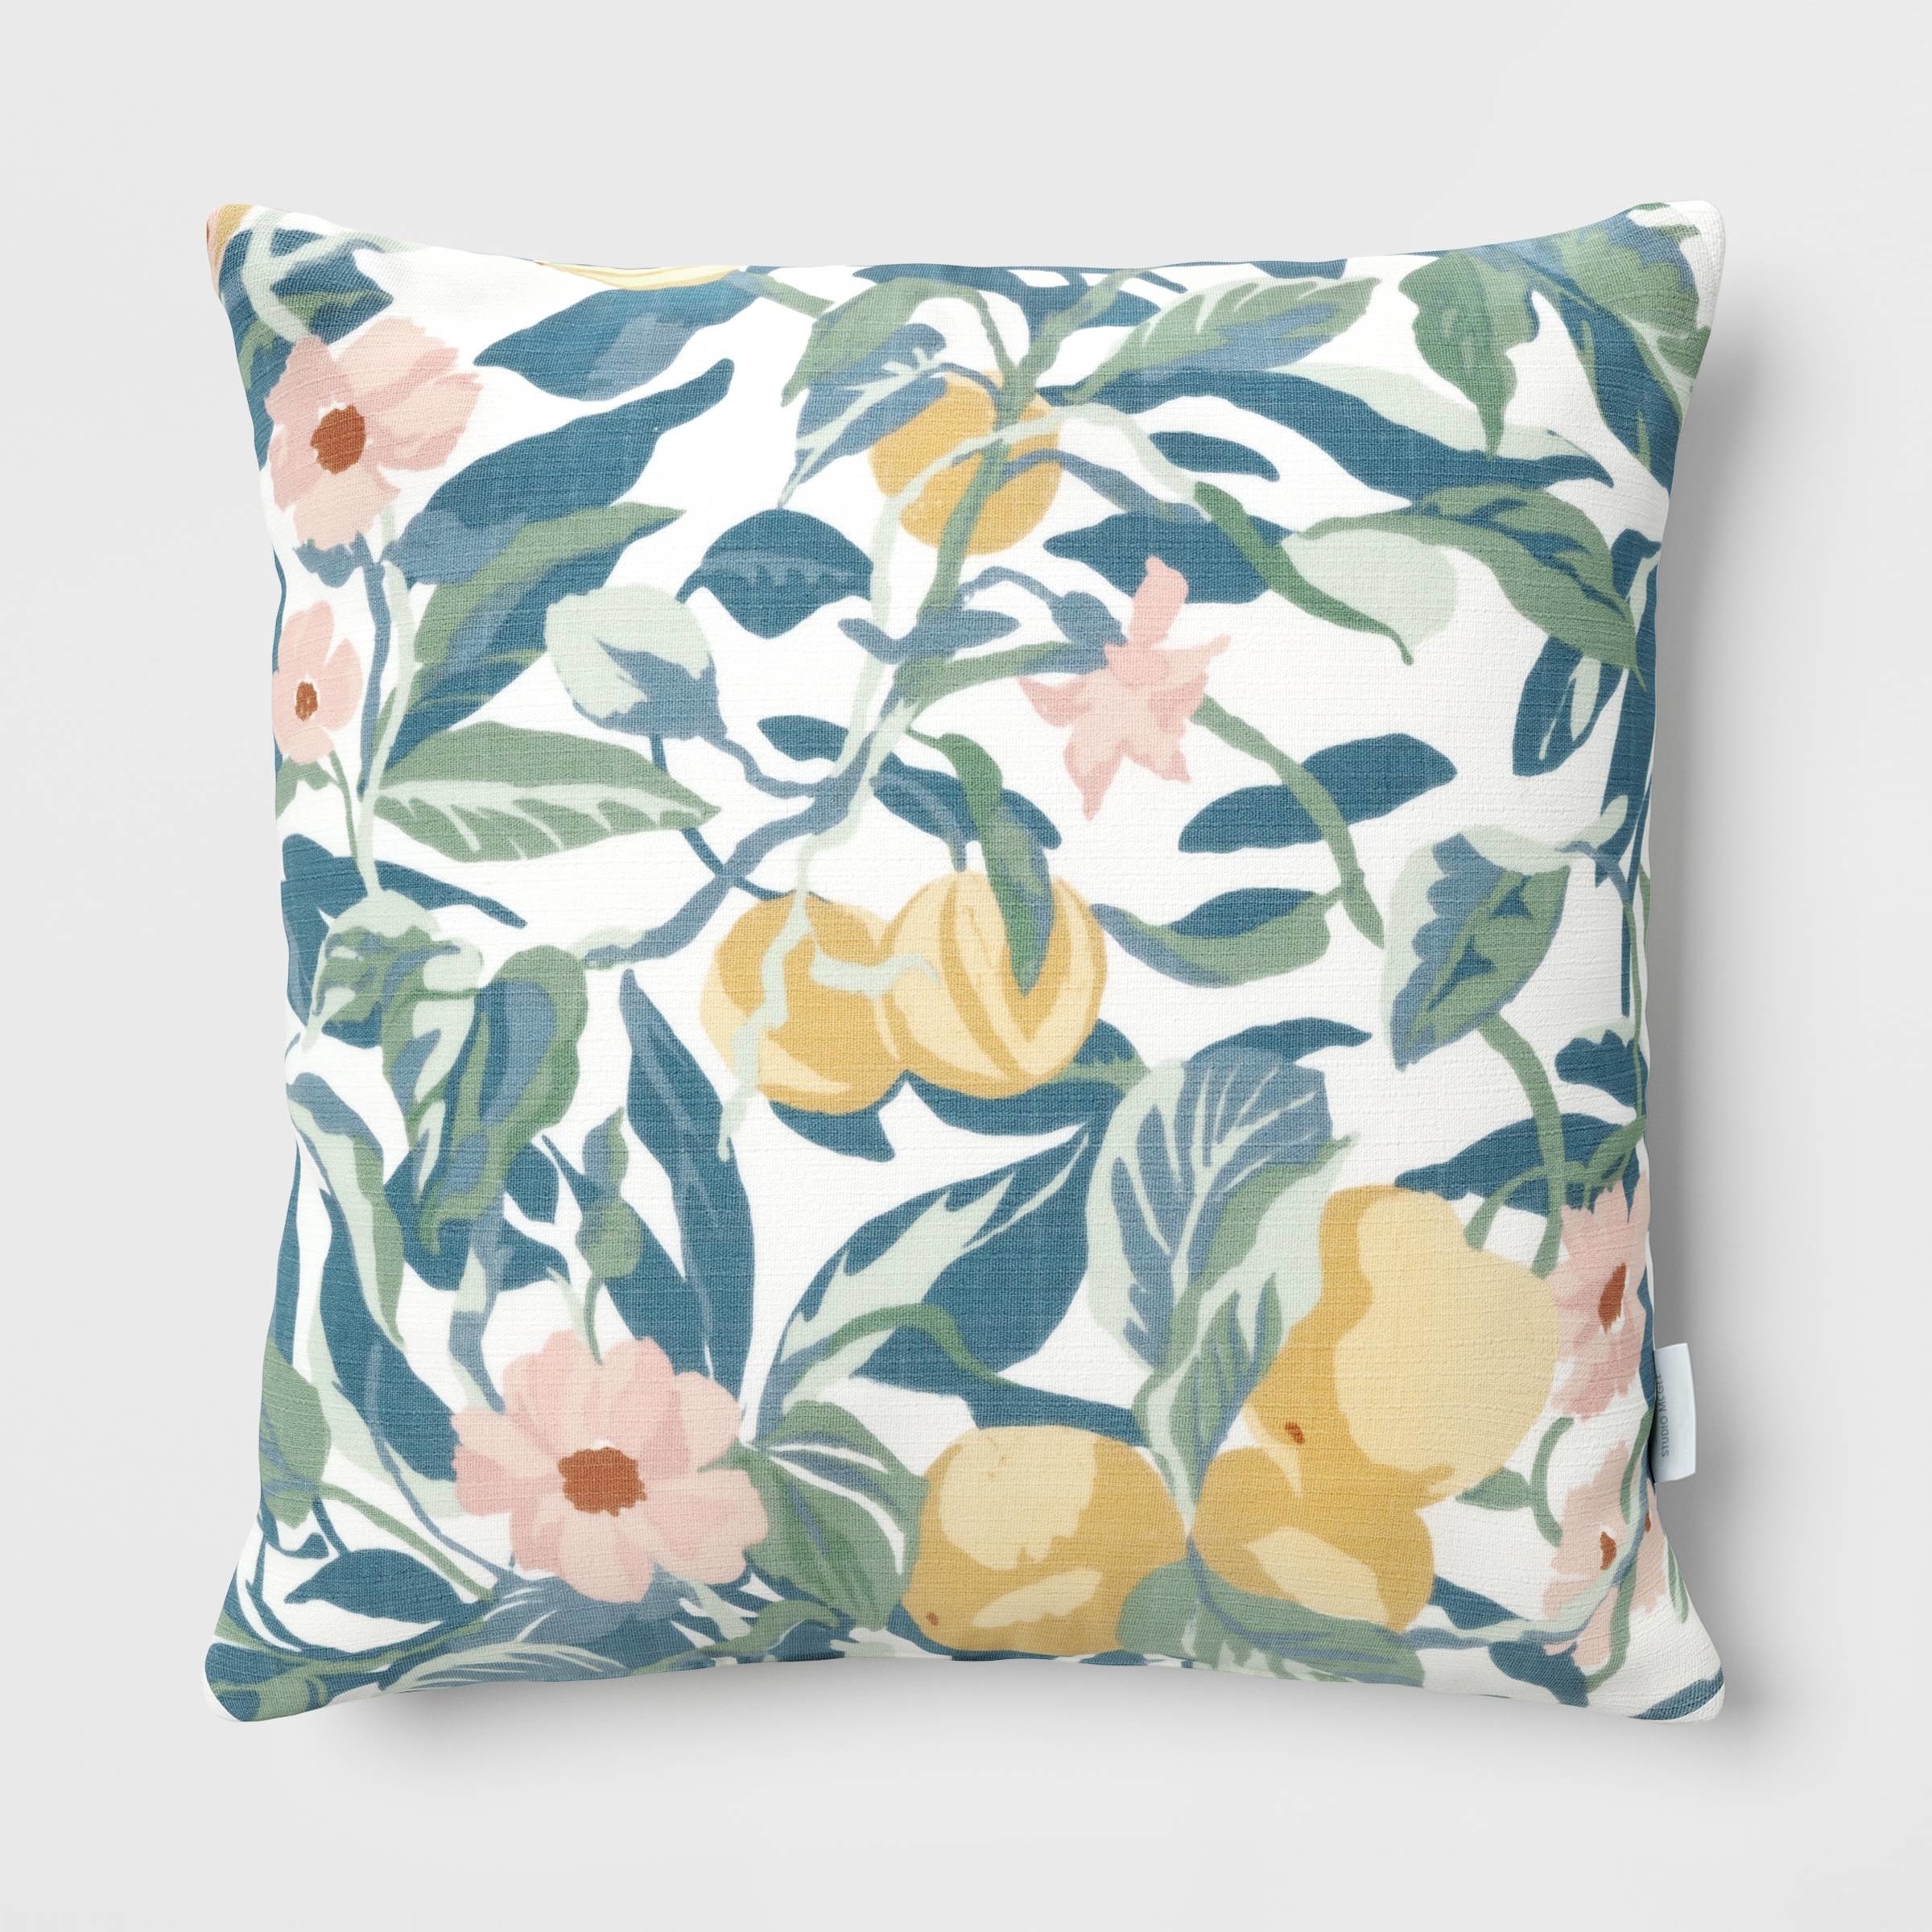 A decorative pillow with a floral and lemon pattern